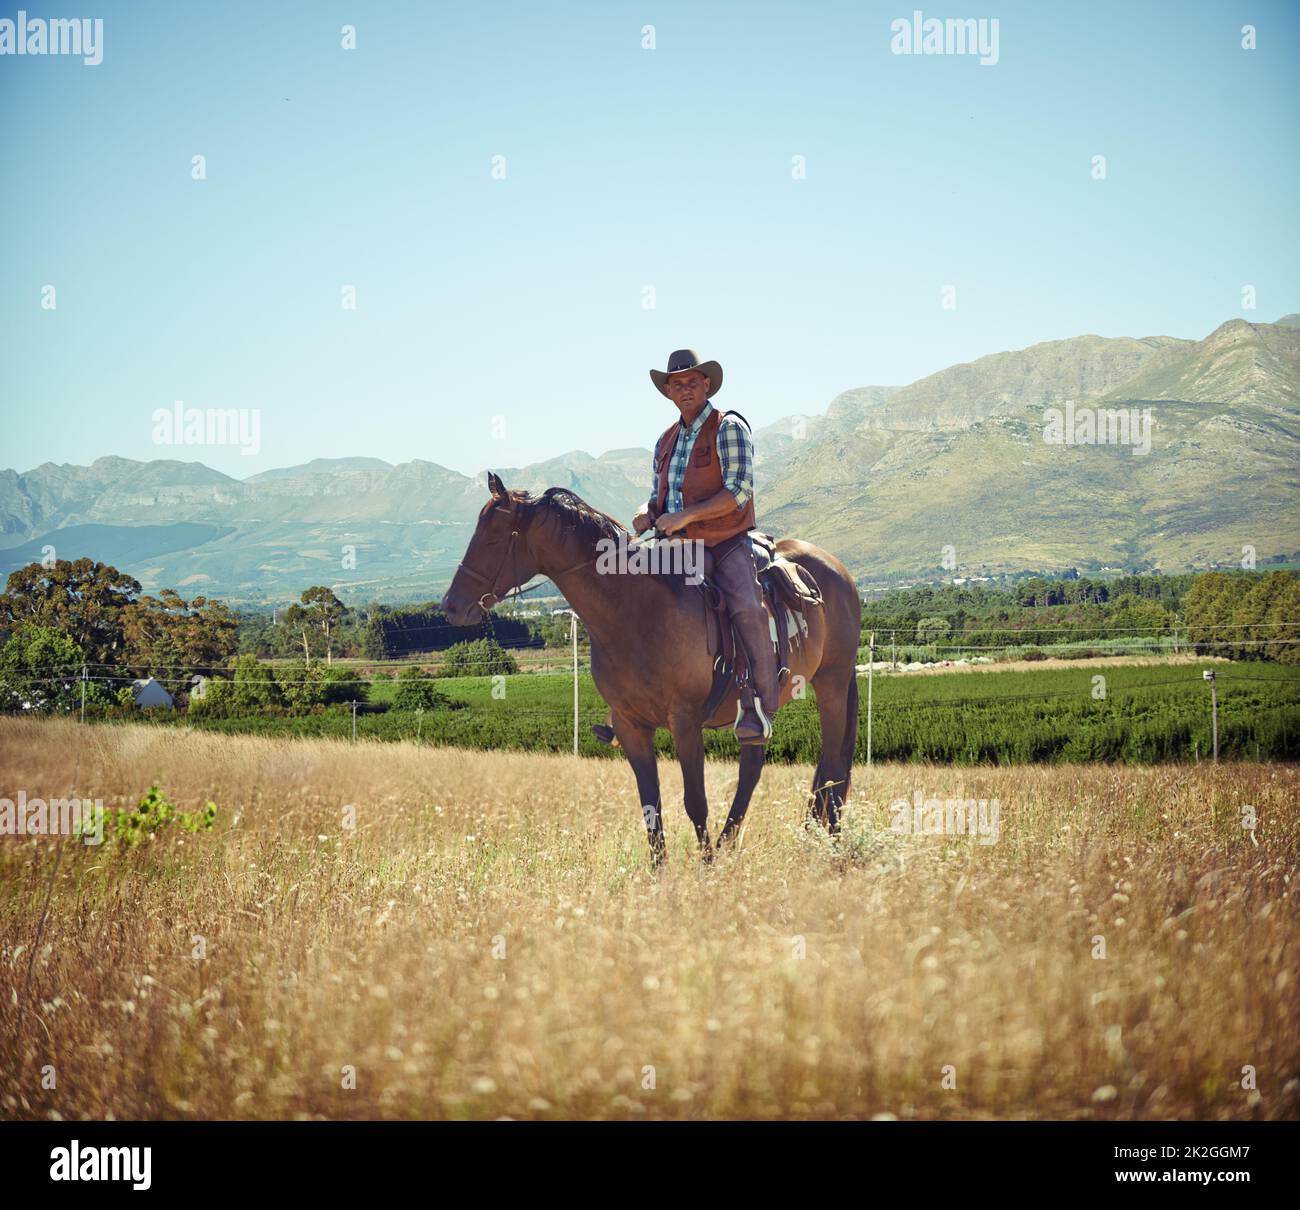 Yeeha. Full-length portrait of a mature man on a horse out in a field. Stock Photo